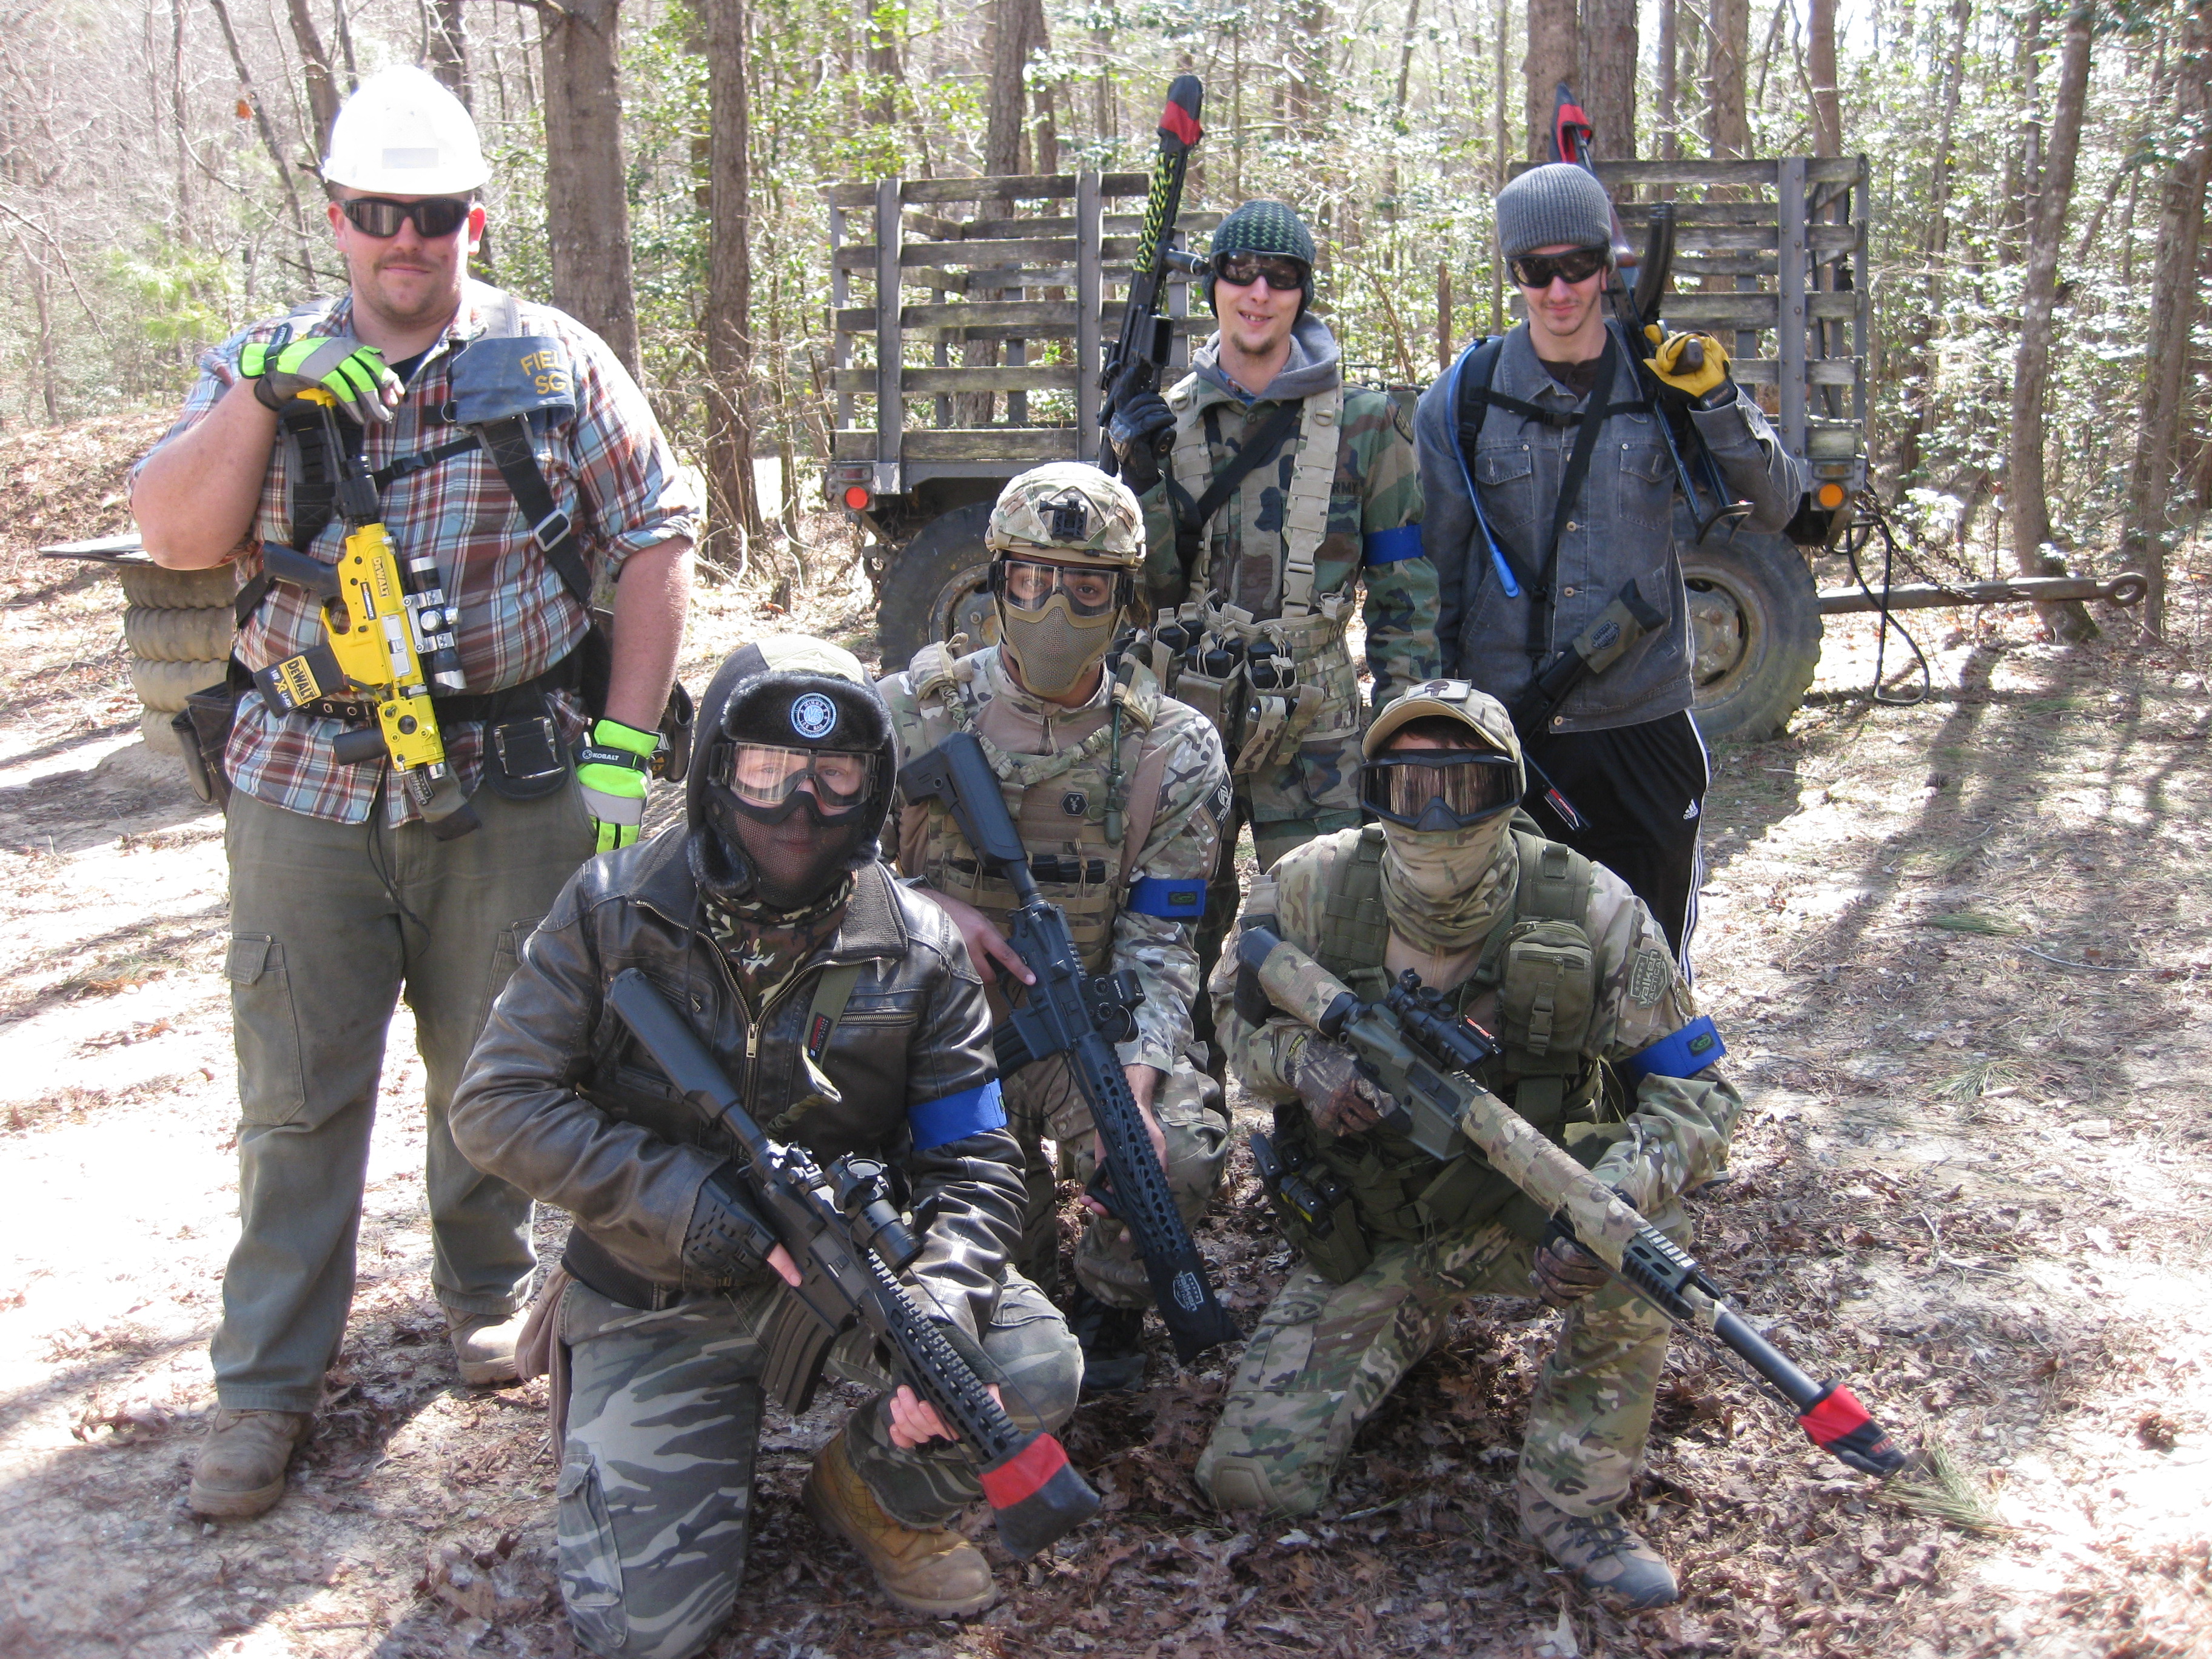 With fellow Airsoft players